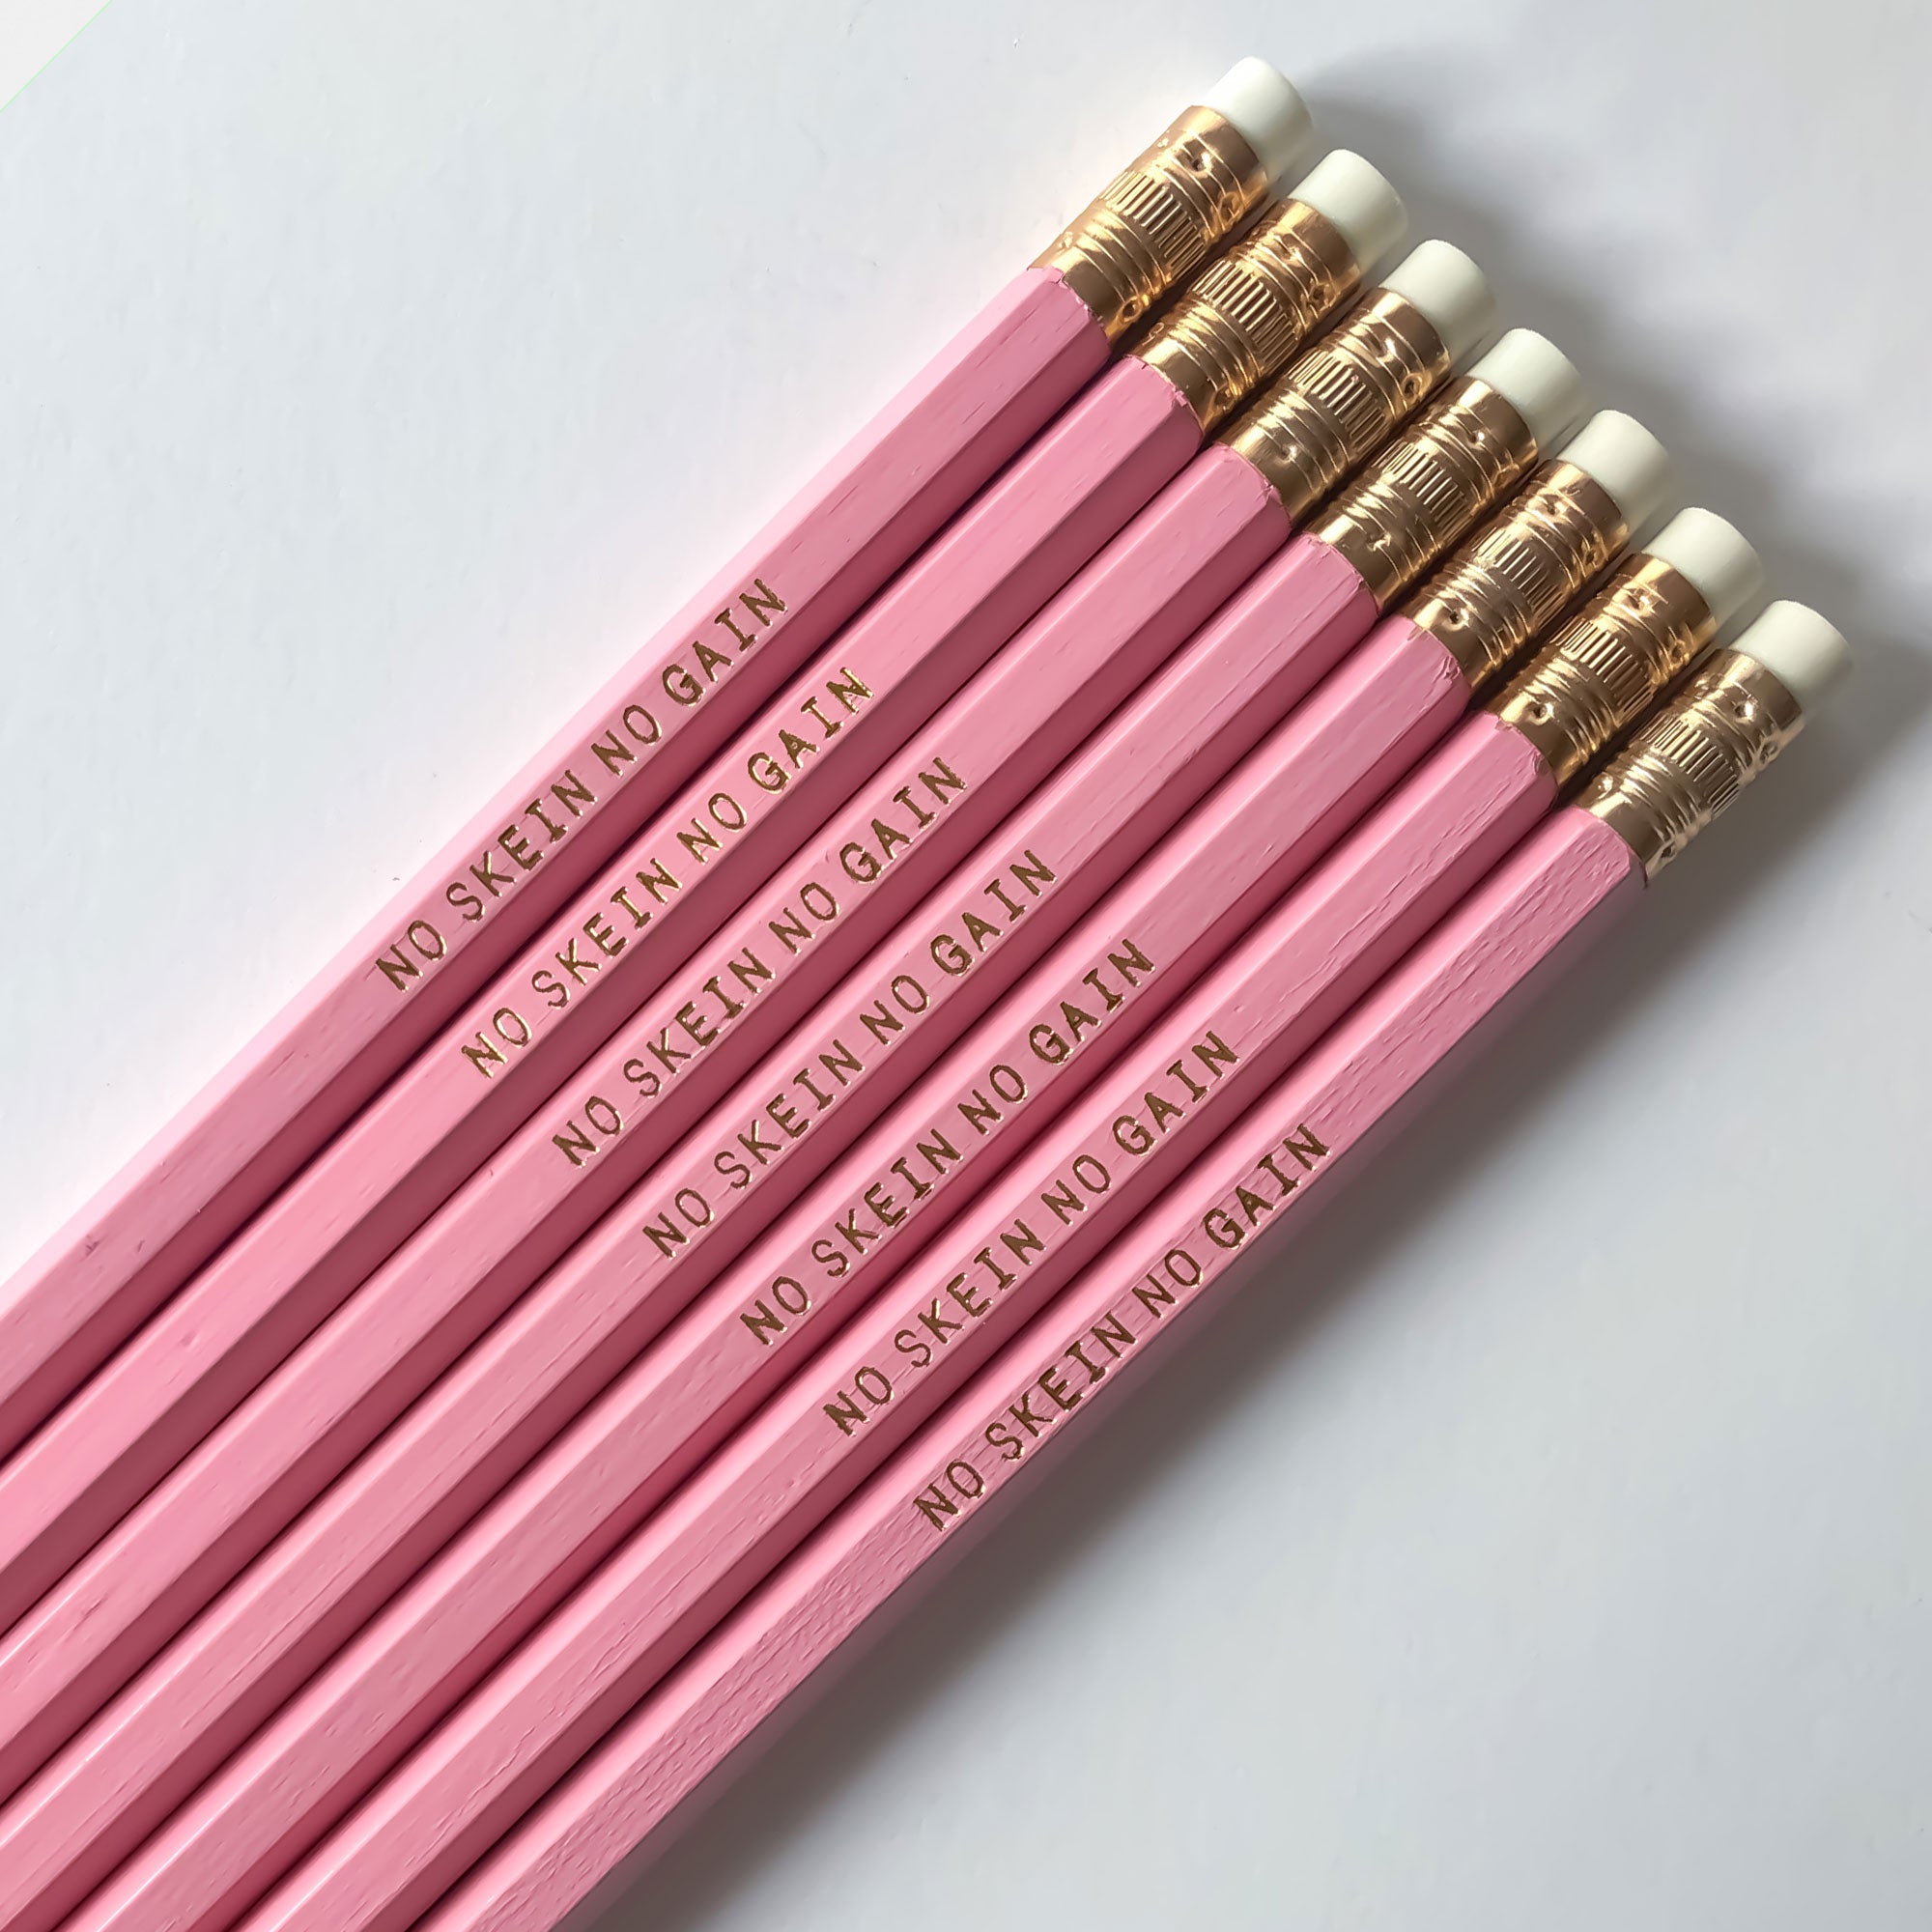 Yarn themed pencil set saying "just one more row" is perfect for knitting and crochet fans